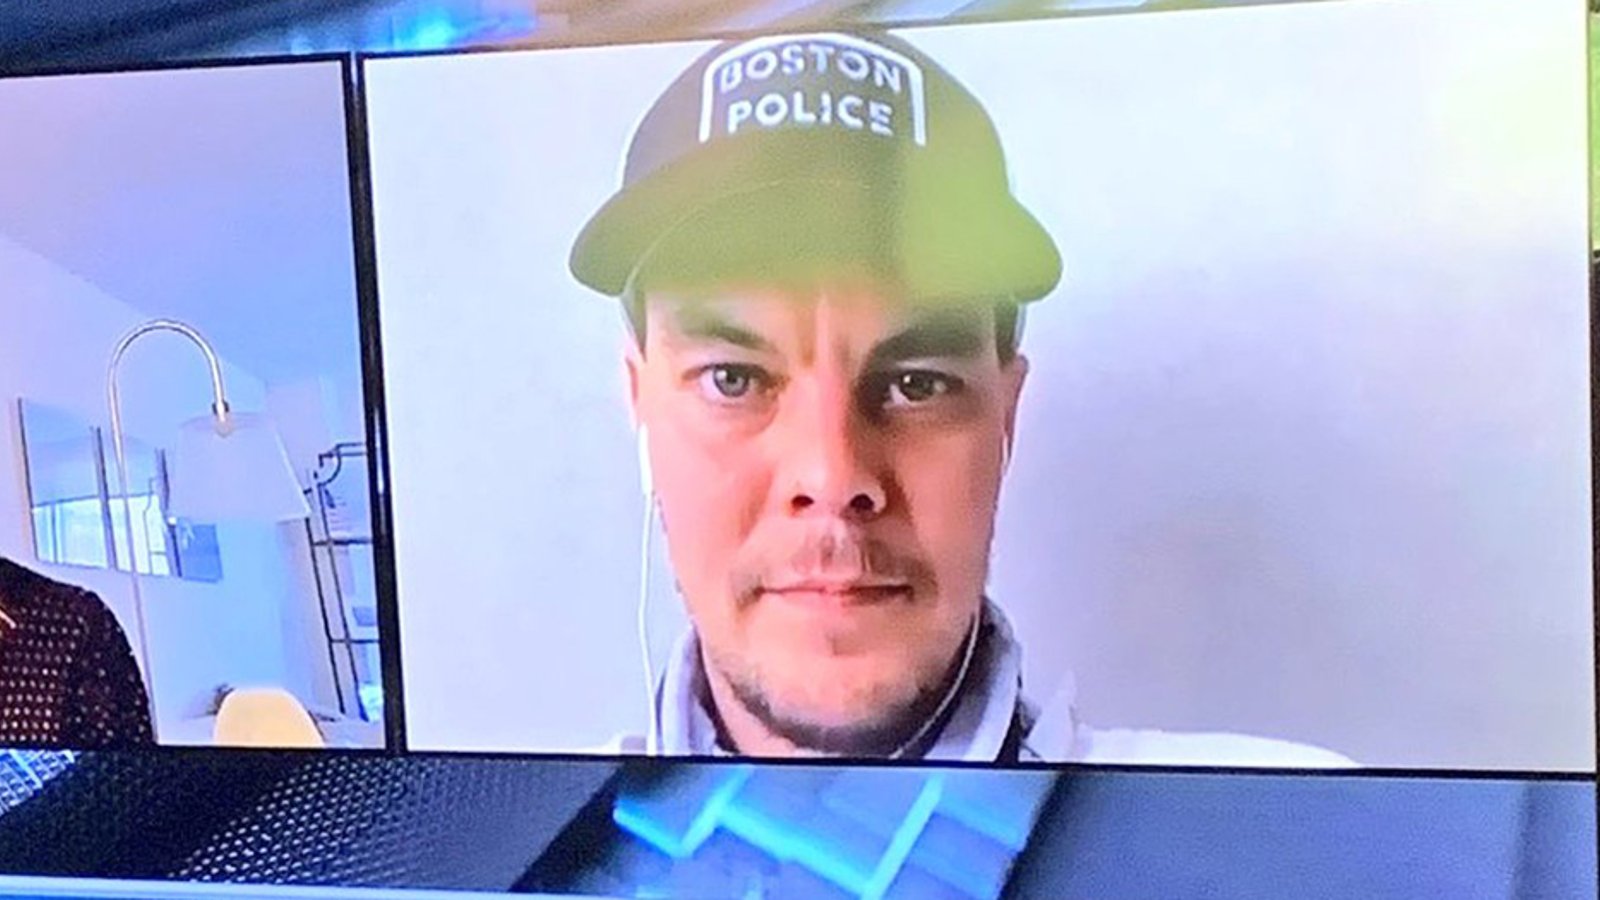 Rask causes controversy by wearing a Boston Police hat during media interview